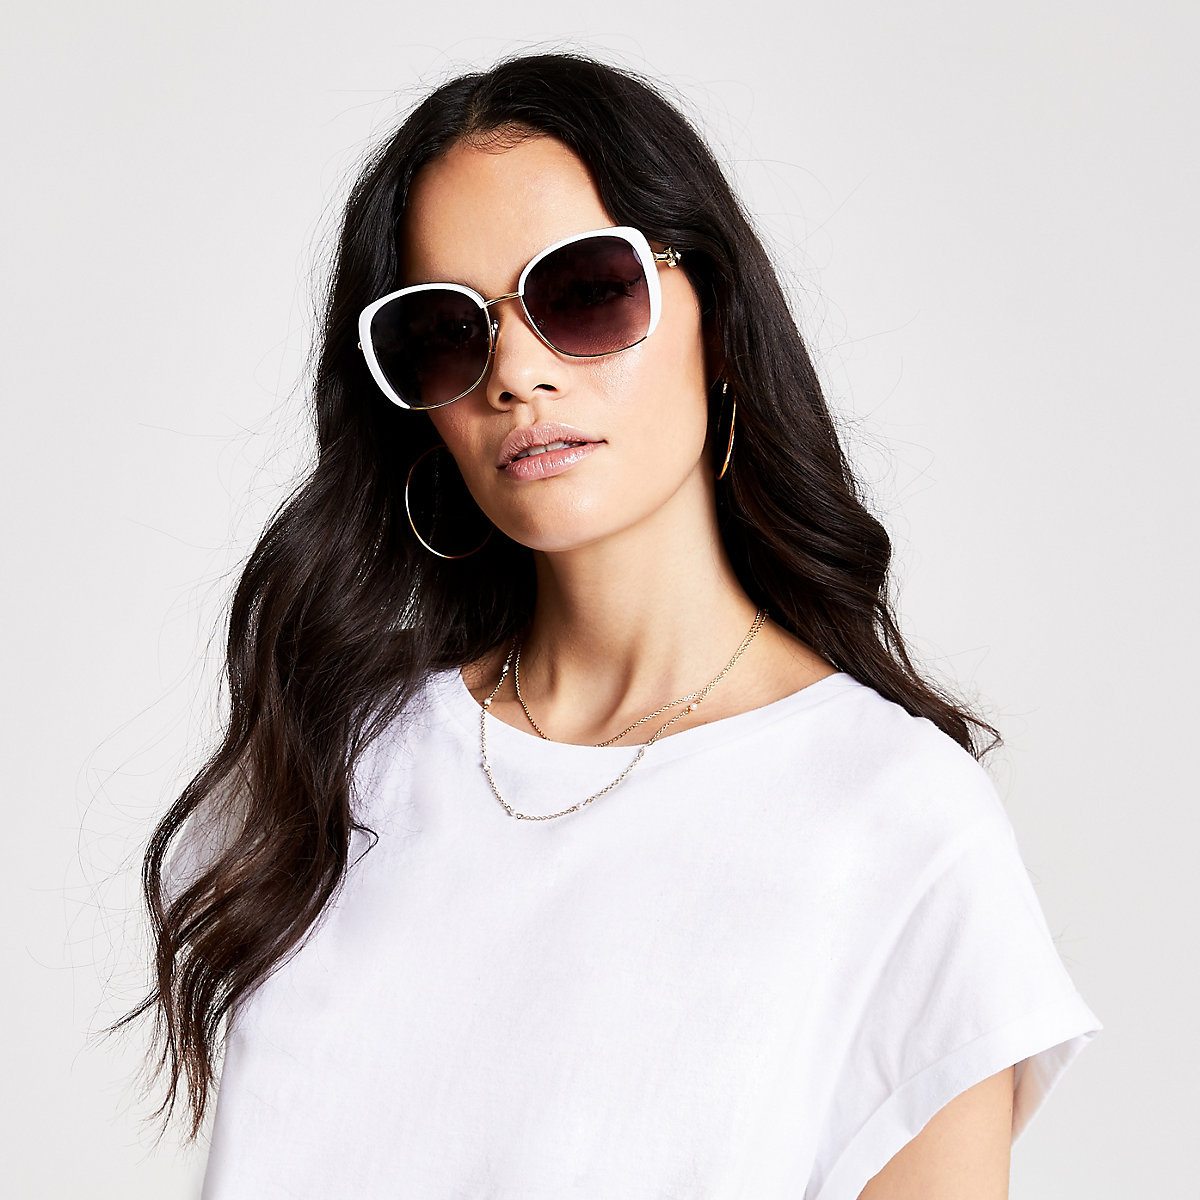 Bridal sunglasses, the perfect sunnies for outdoor weddings this summer ...